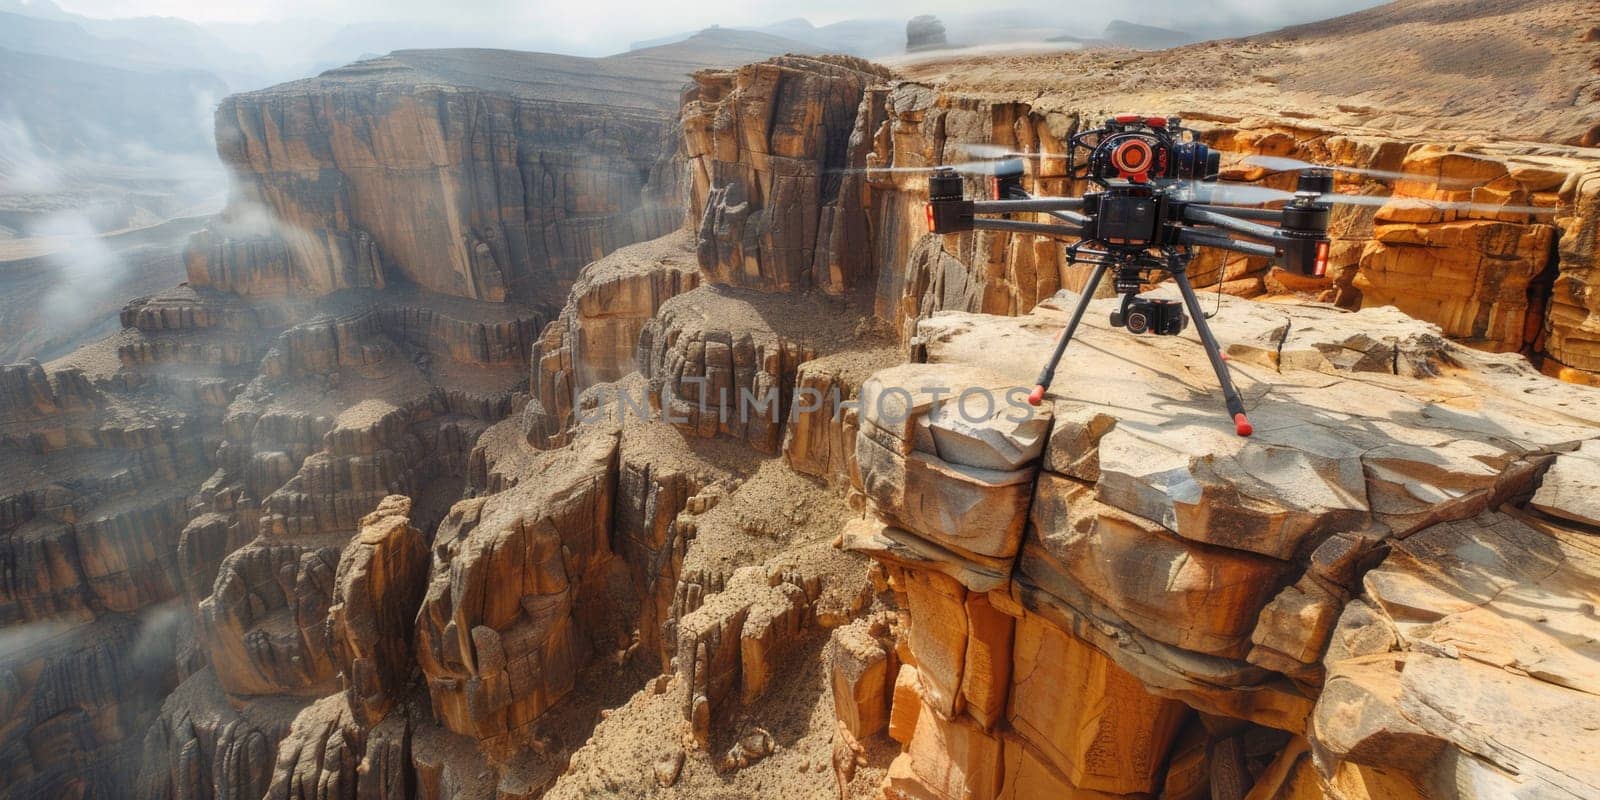 Camera Mounted on Cliff by but_photo